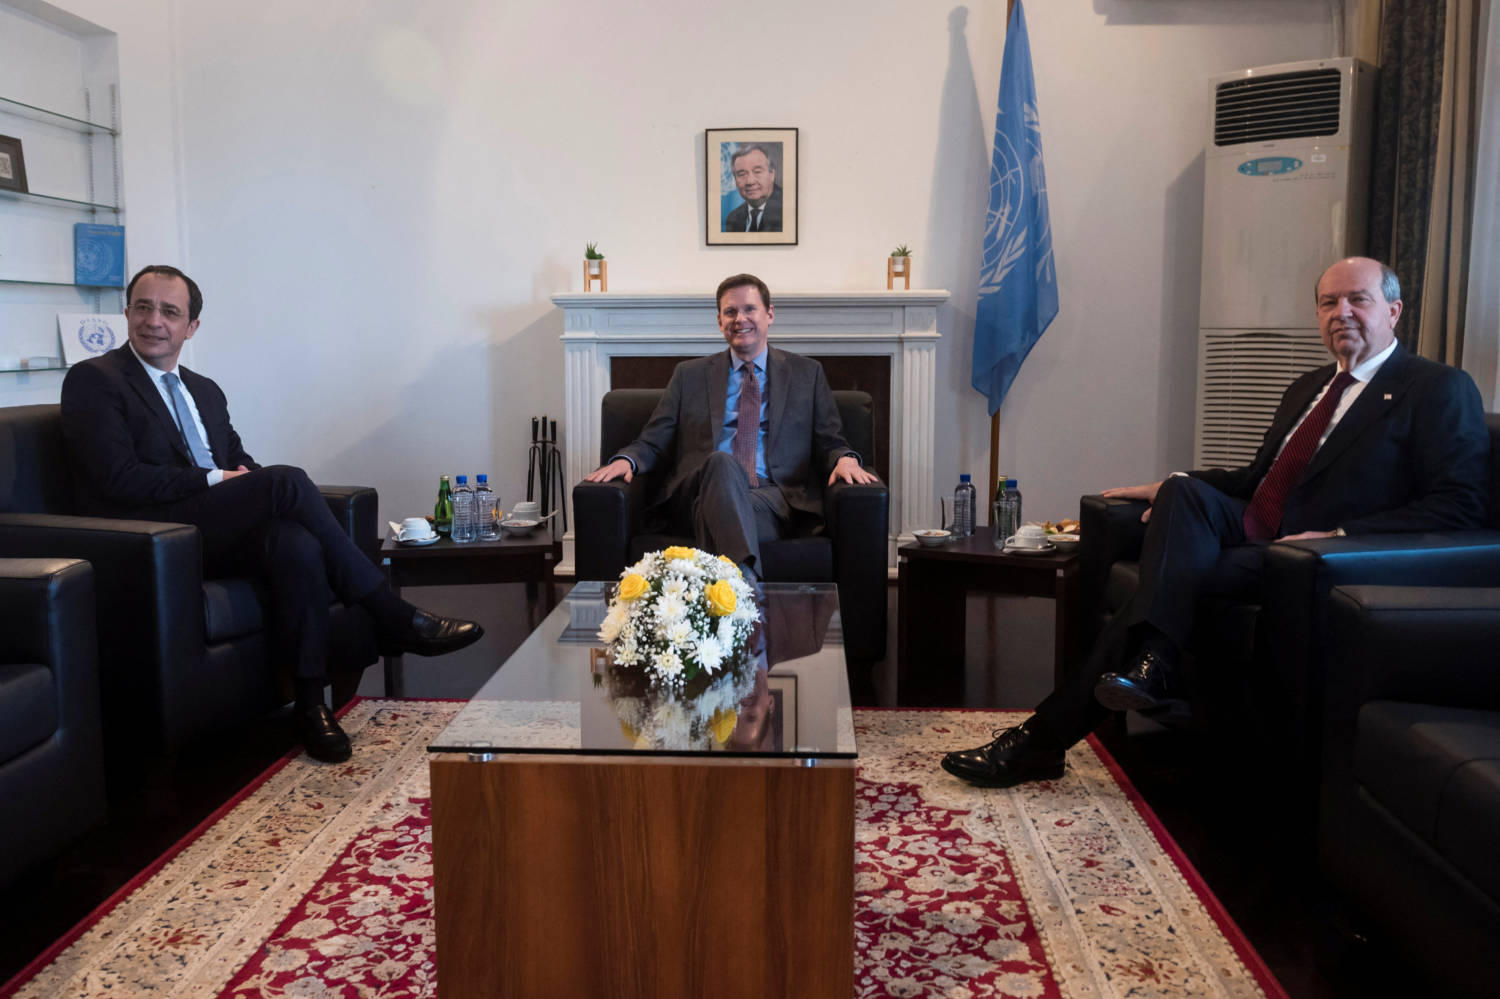 Meeting At The Residence Of The Un Peacekeeping Force's Chief Of Mission Inside The Un Controlled Buffer Zone In Nicosia